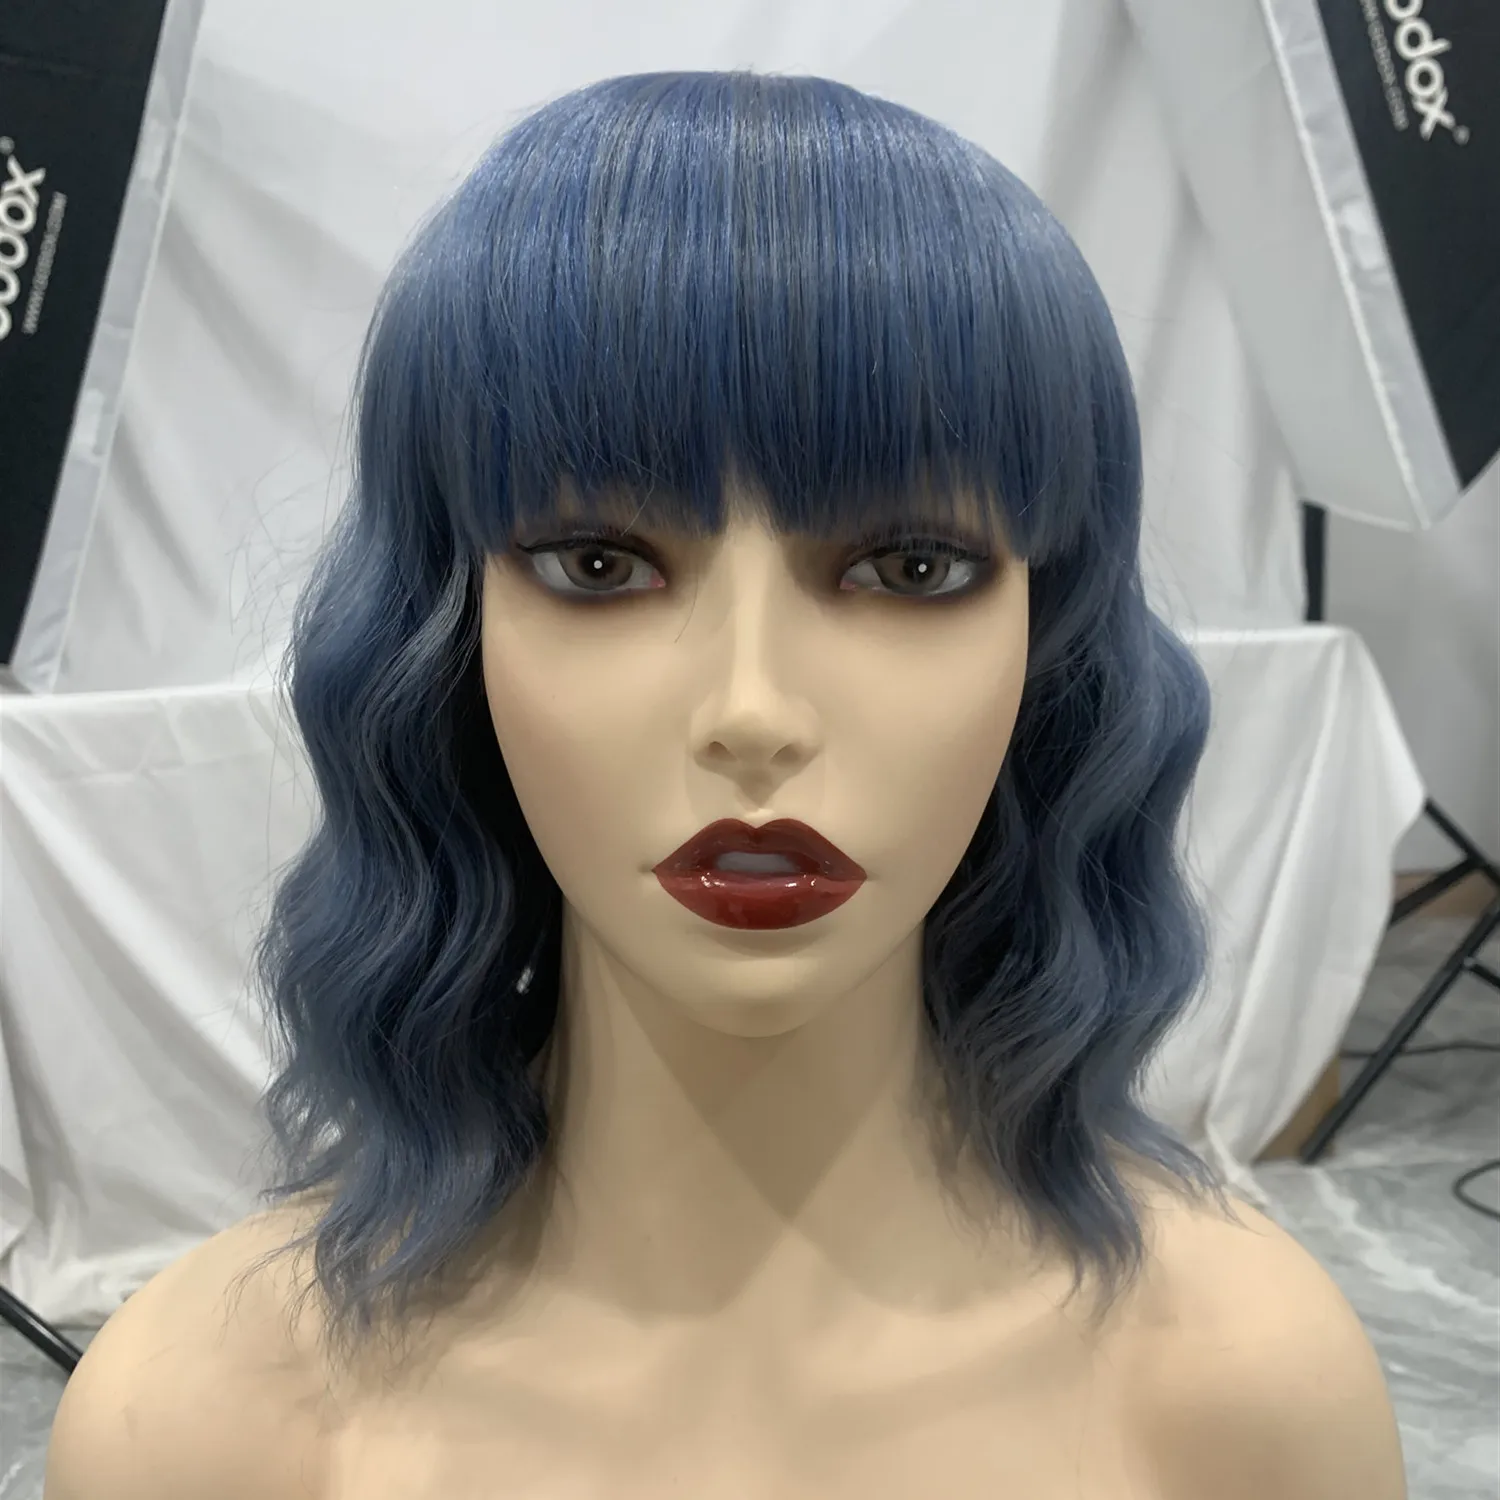 

Medo Wholesale Premium Synthetic Hair Blonde Blue Pink 613 Color Body Wave Short Curly Bob With Bang Wig